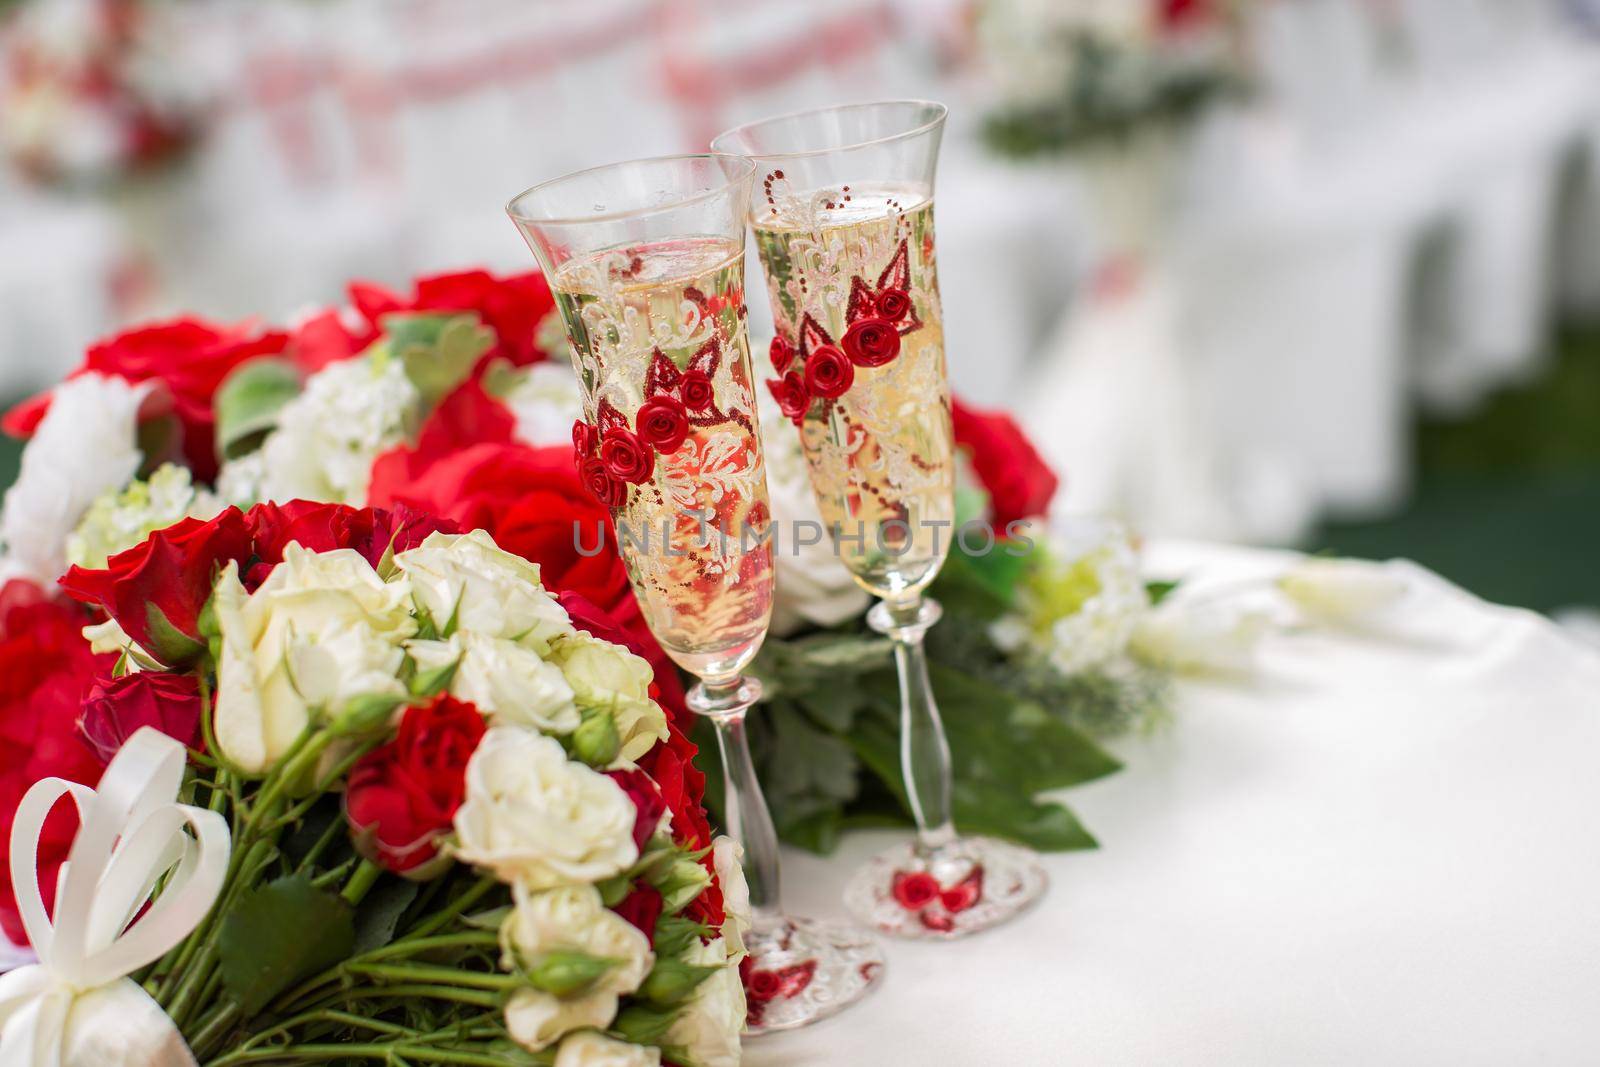 The champagne glasses. Wedding ceremony outdoors. Bouquet with red flowers.